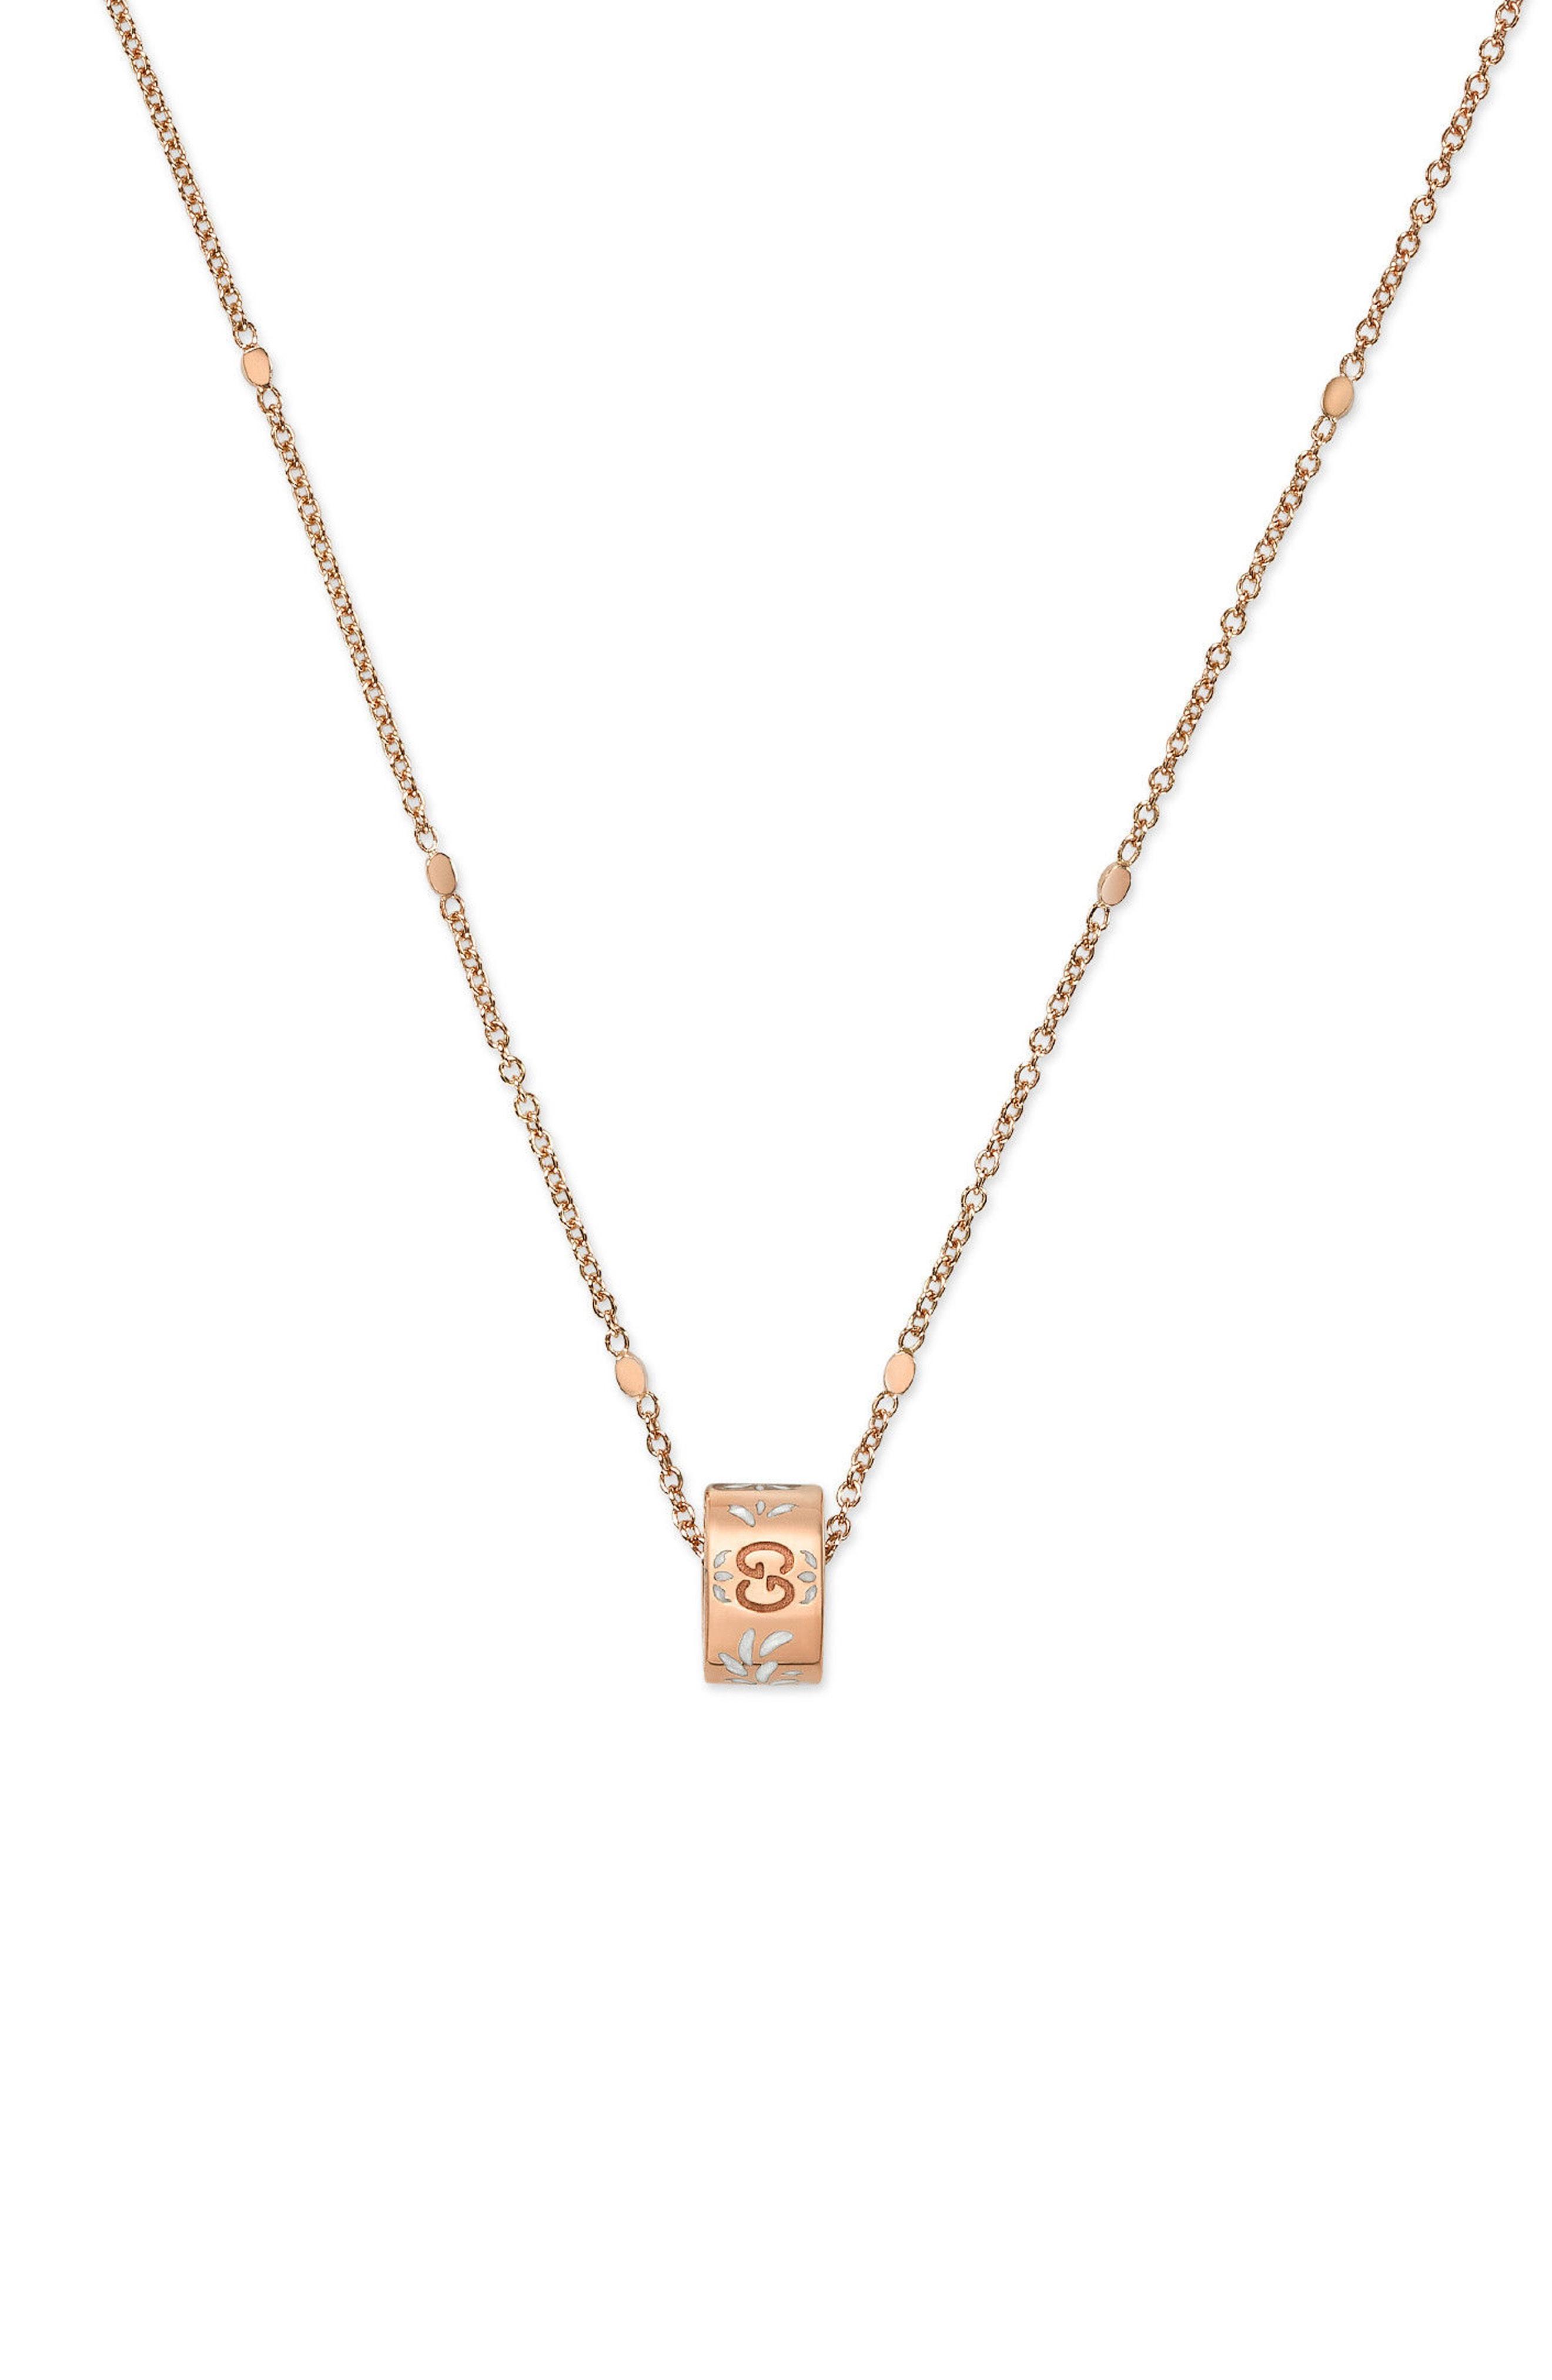 gucci rose gold necklace